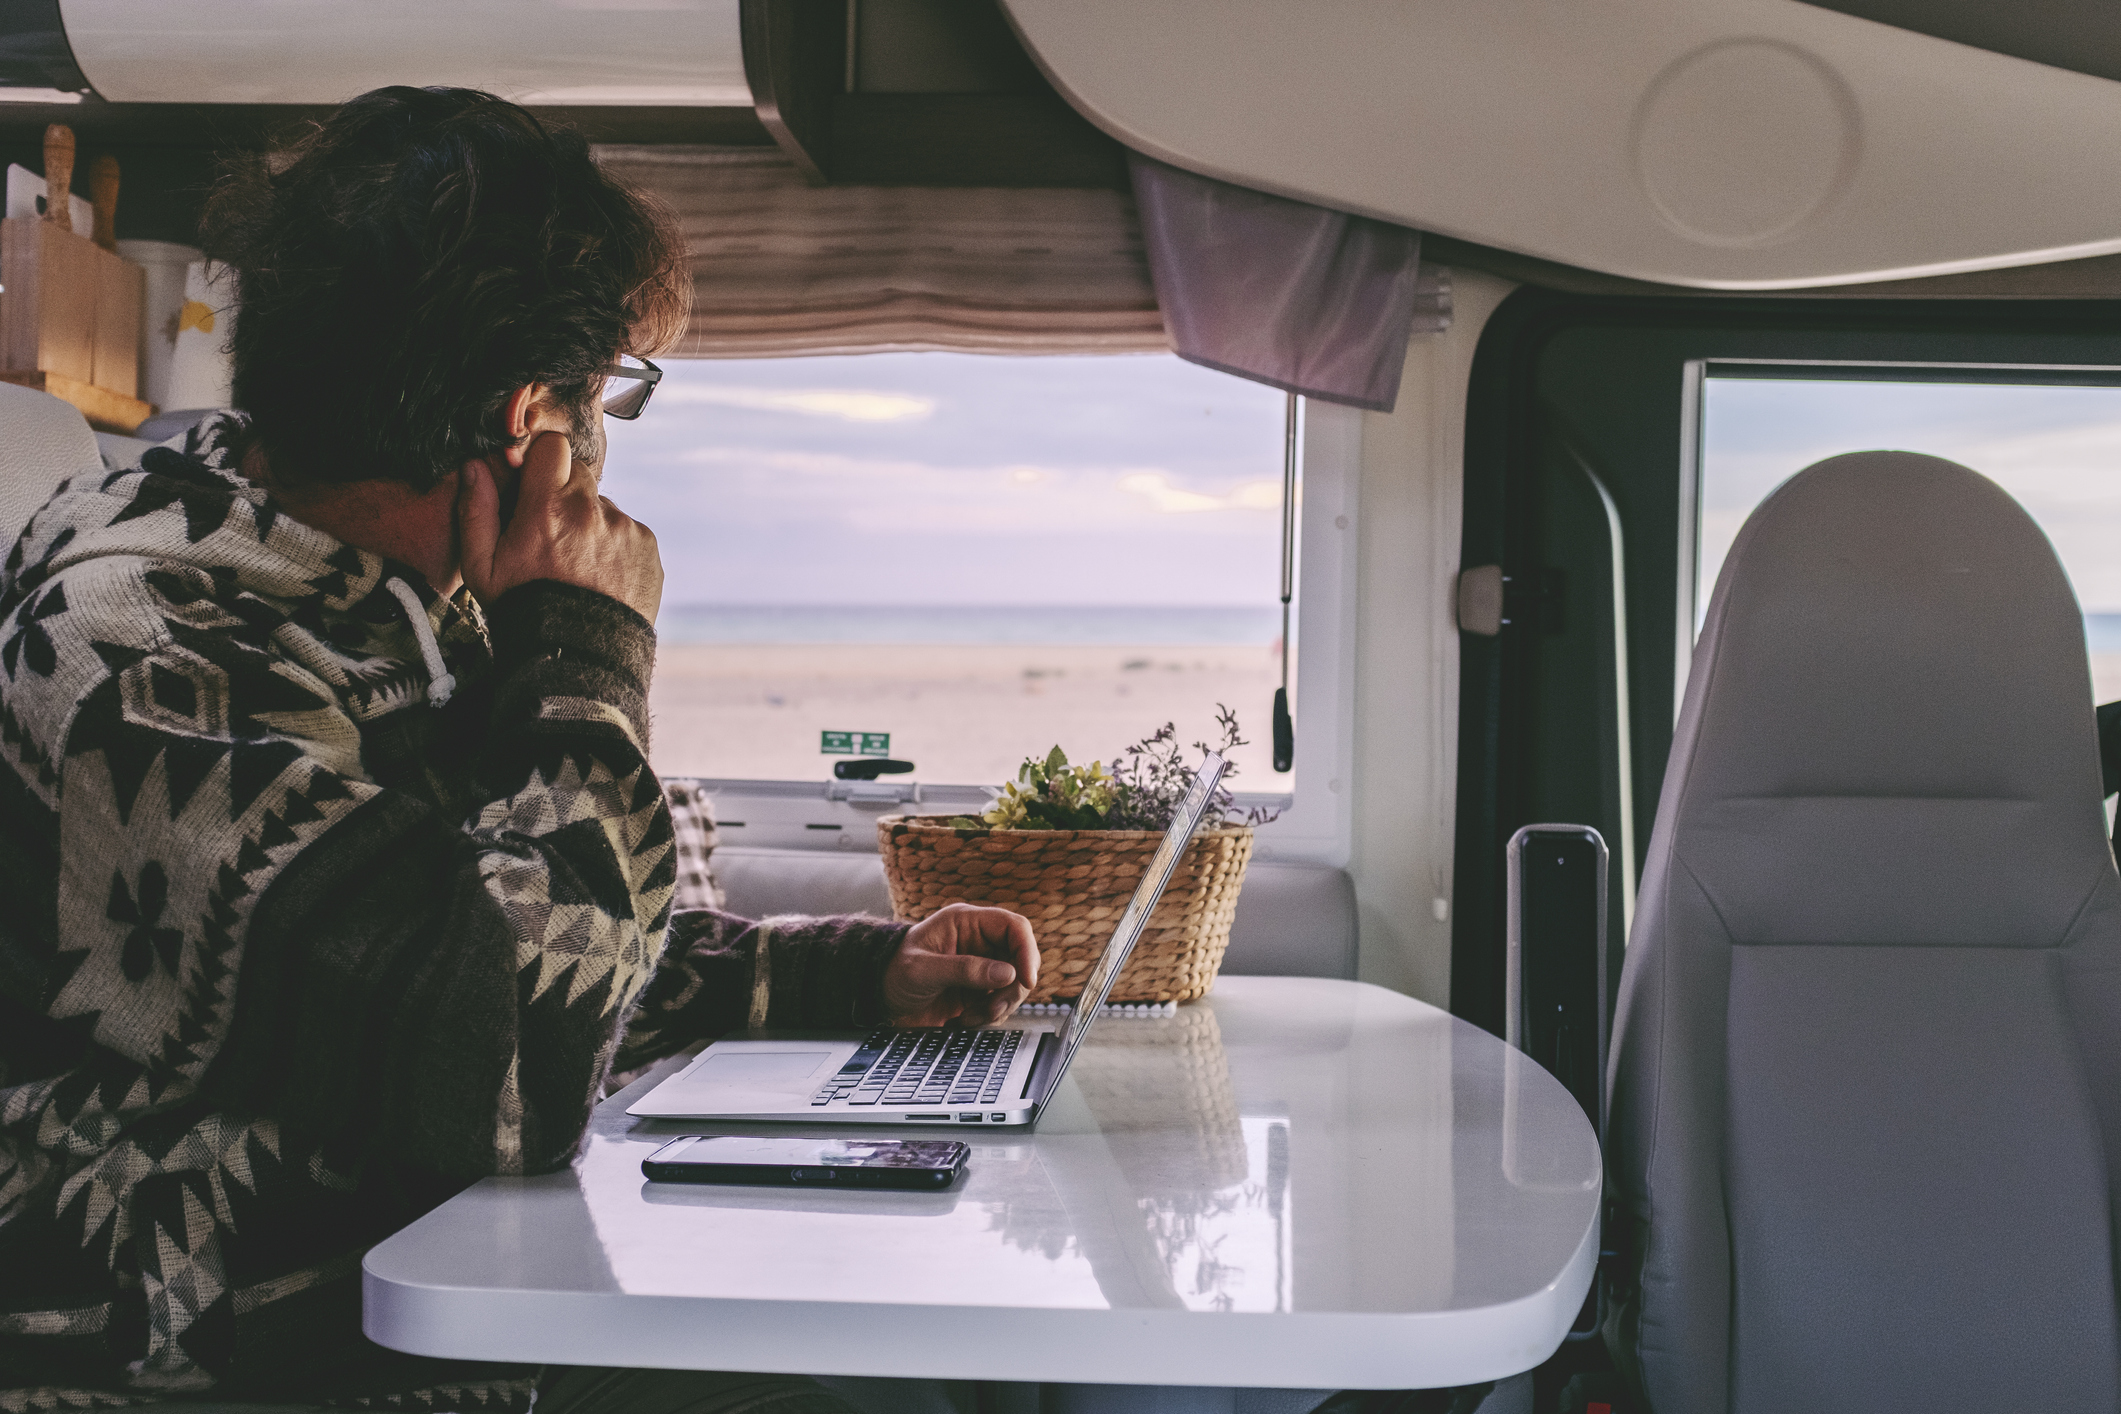 Person sitting at a table in an RV looking out the window with a laptop on the table